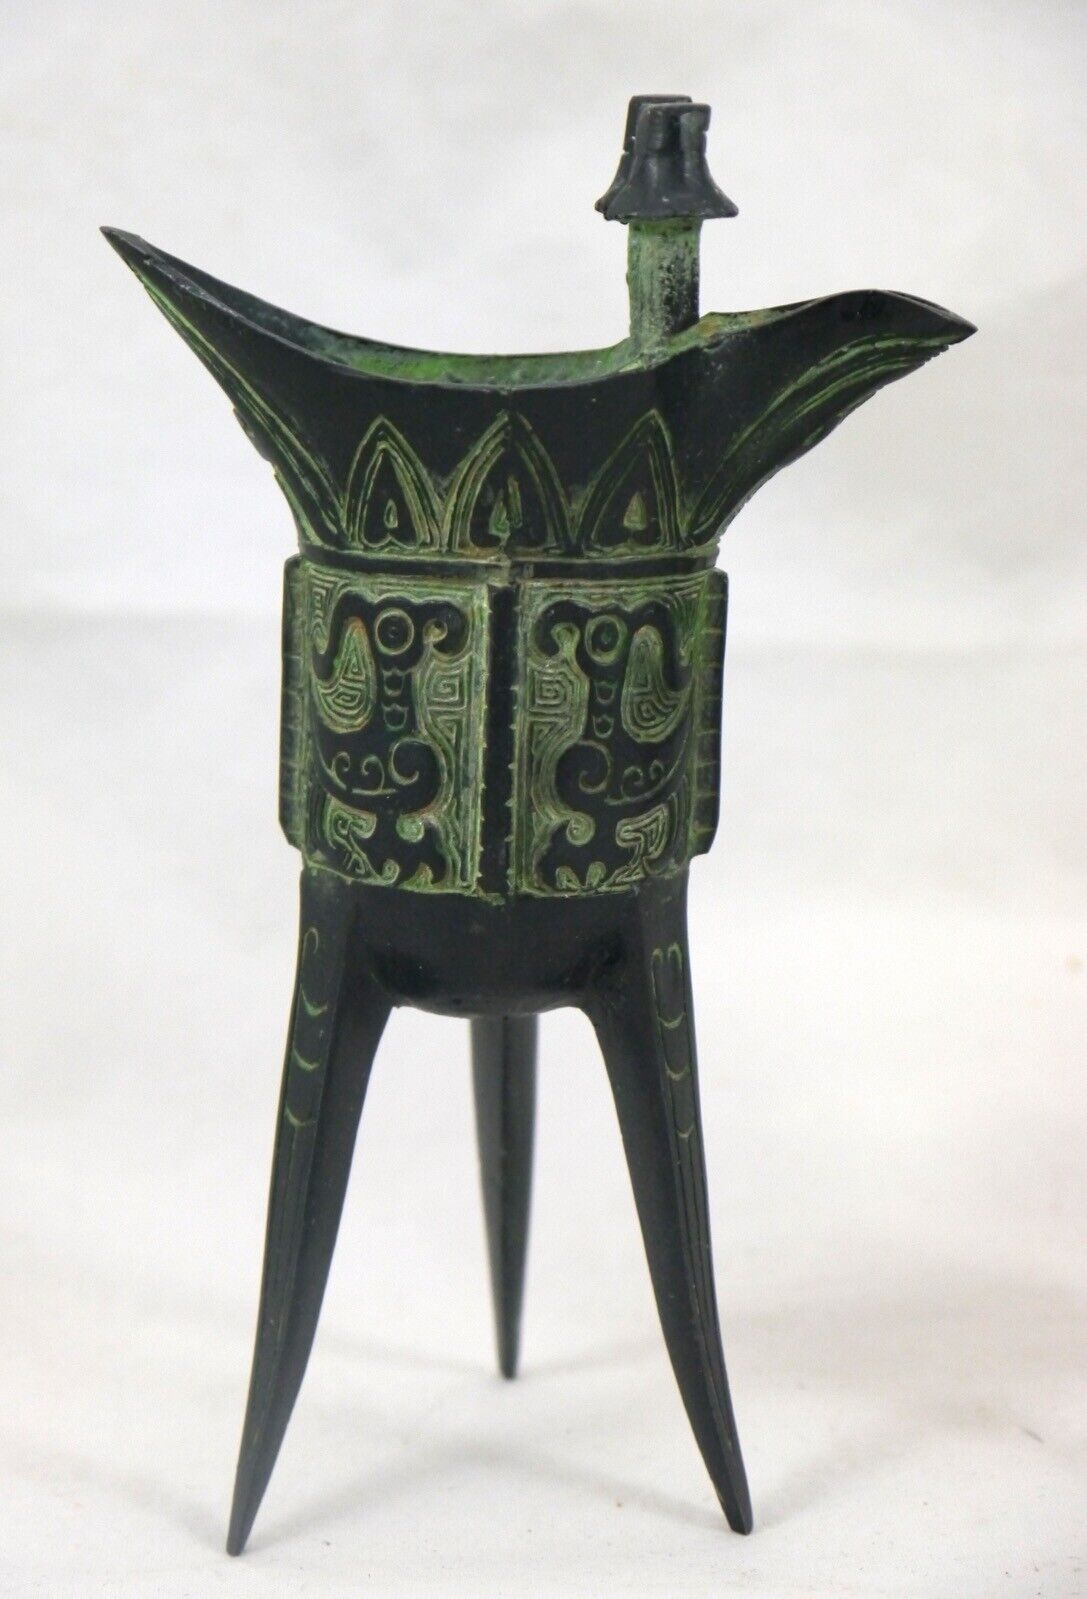 Vintage Chinese Jue Ceremonial Ritual Bronze Tripod Wine Vessel Cup w Taotie a